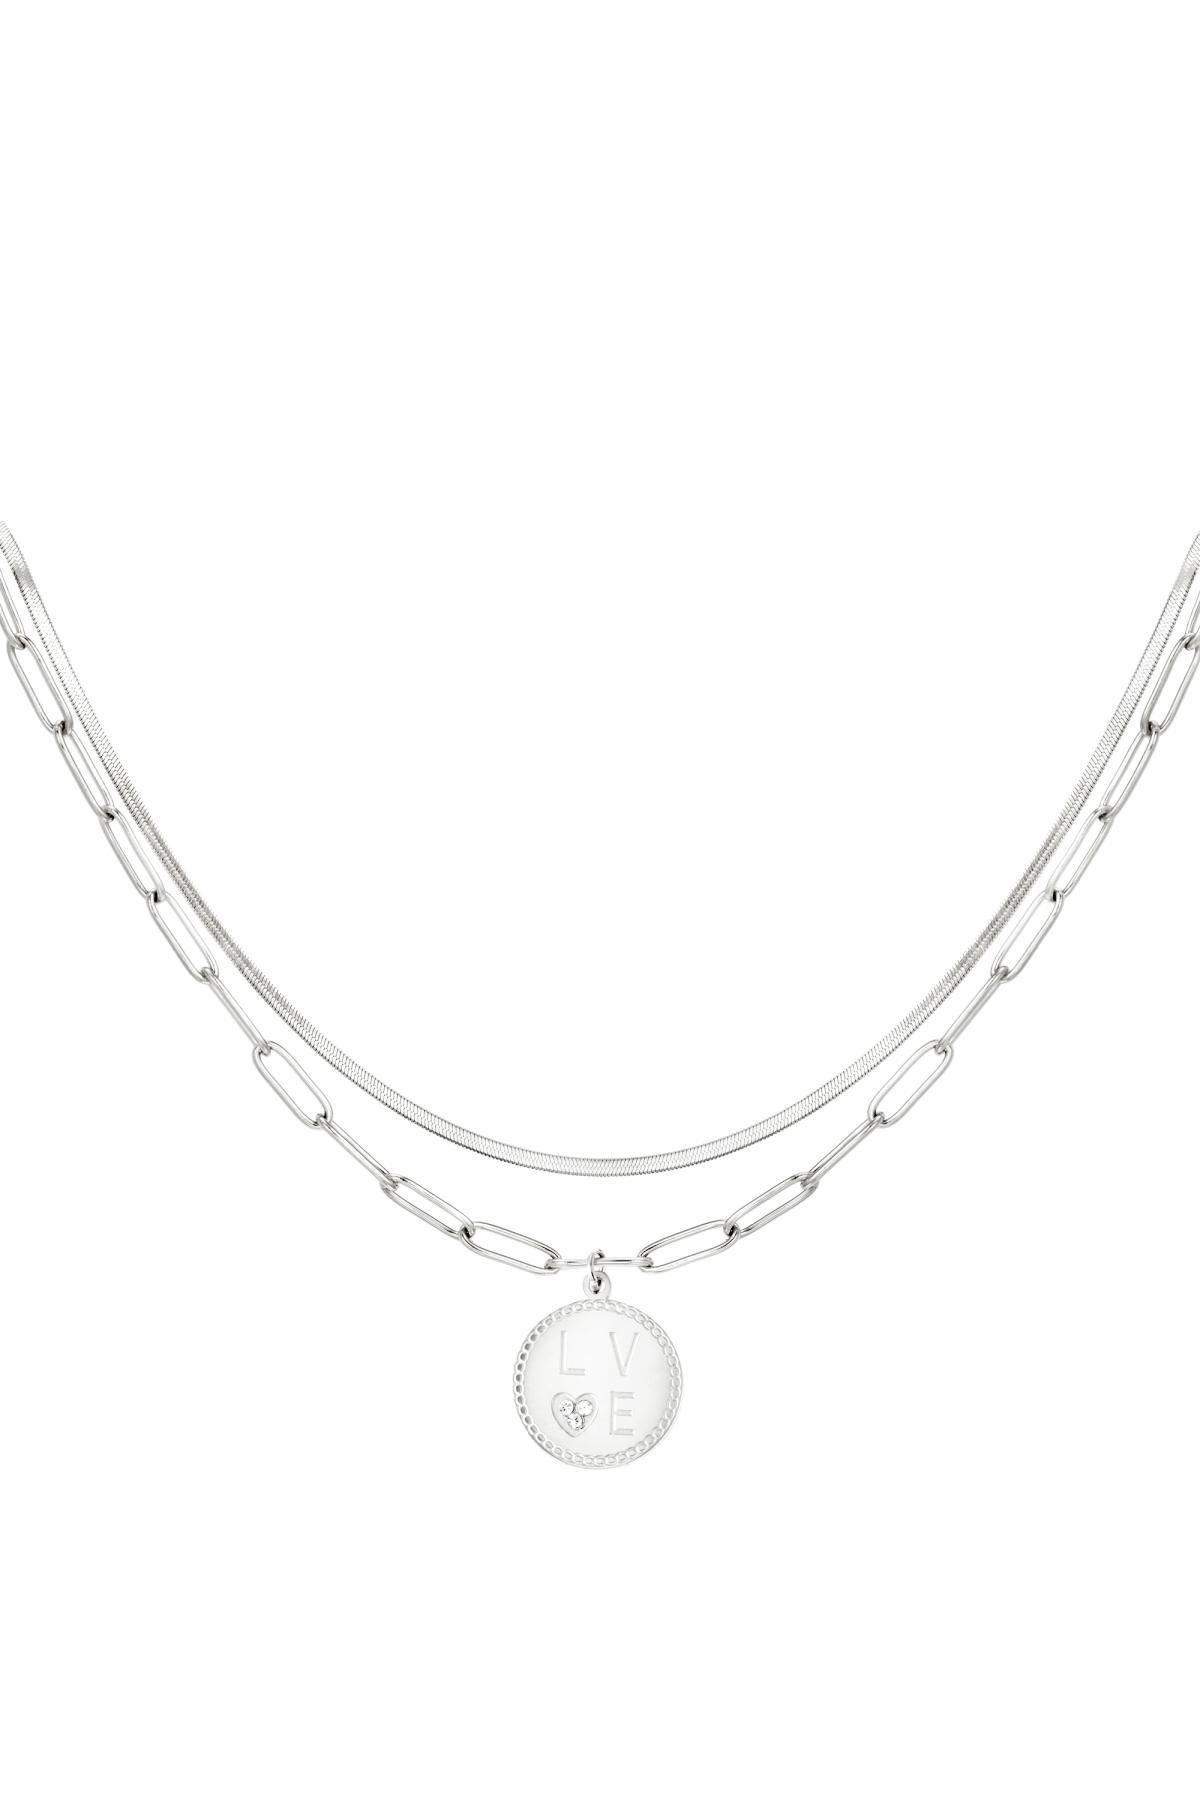 Stainless steel double necklace love Silver